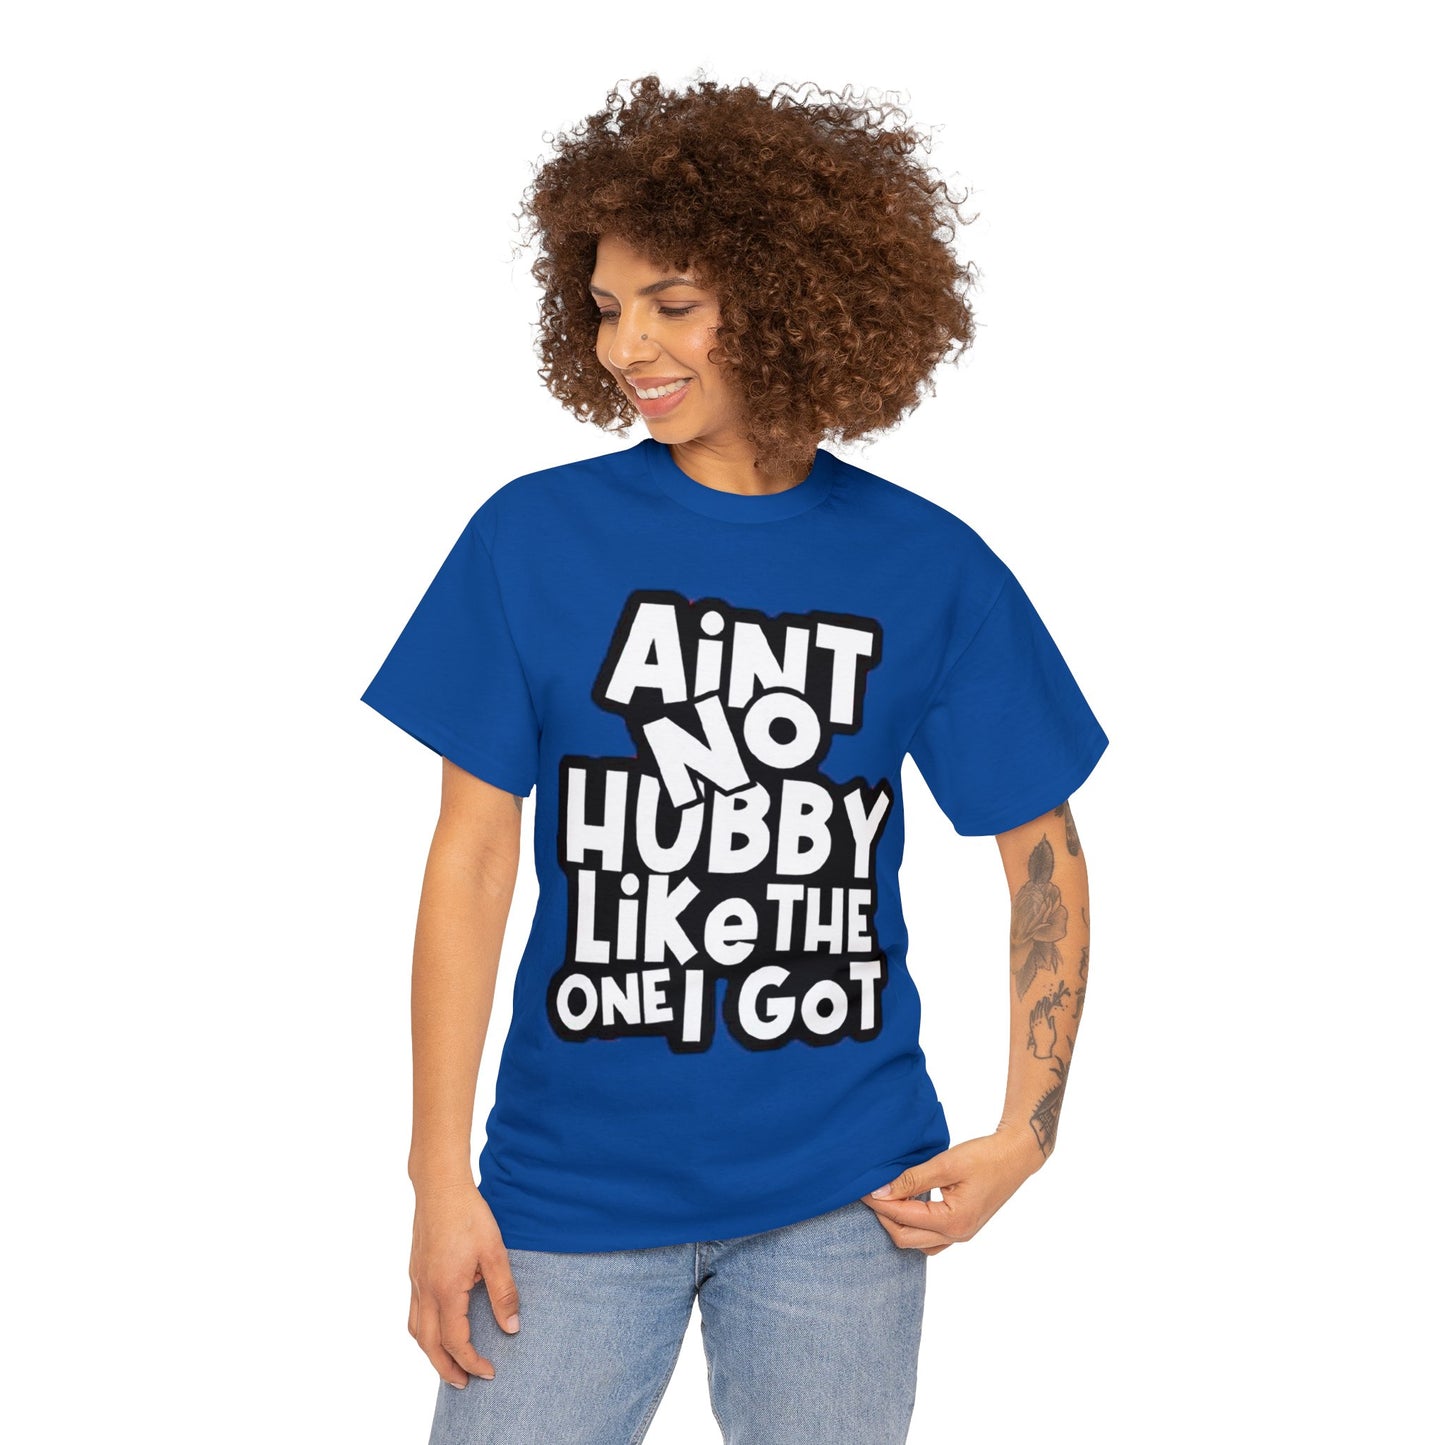 Ain't No Hubby Like The One I Got | Deluxe Royal Blue